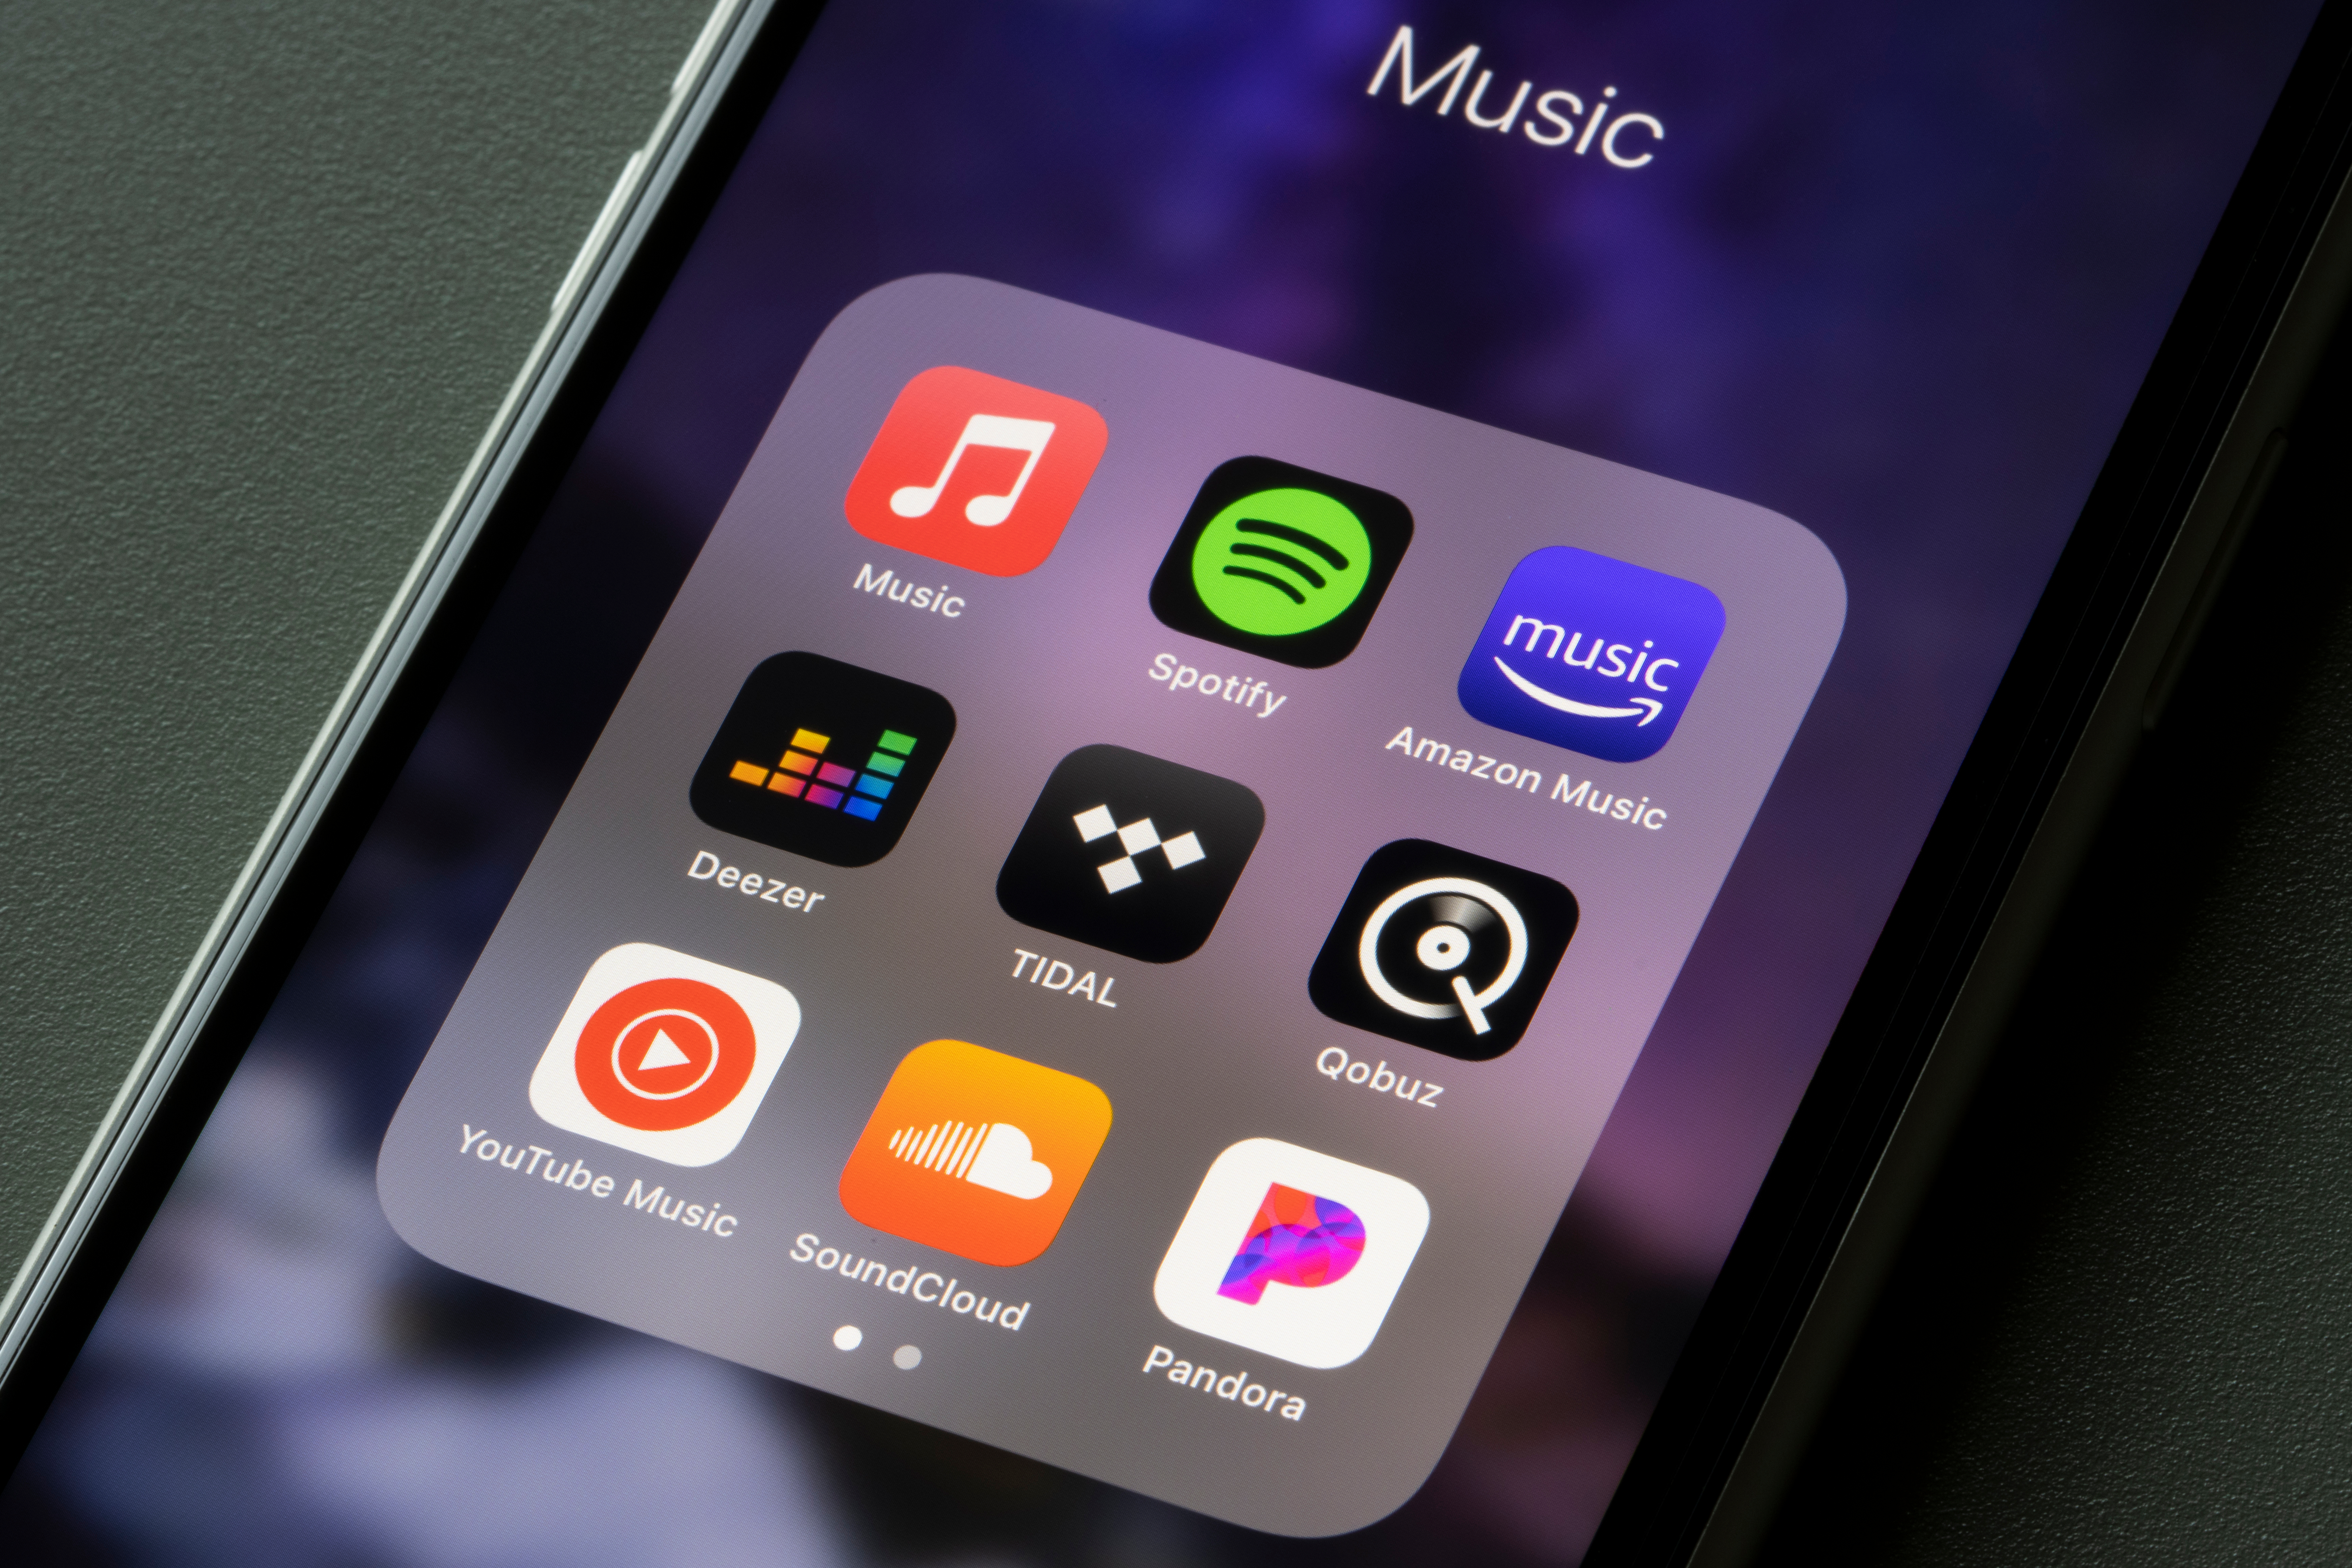 Which music streaming service has the best perks and add-ons?